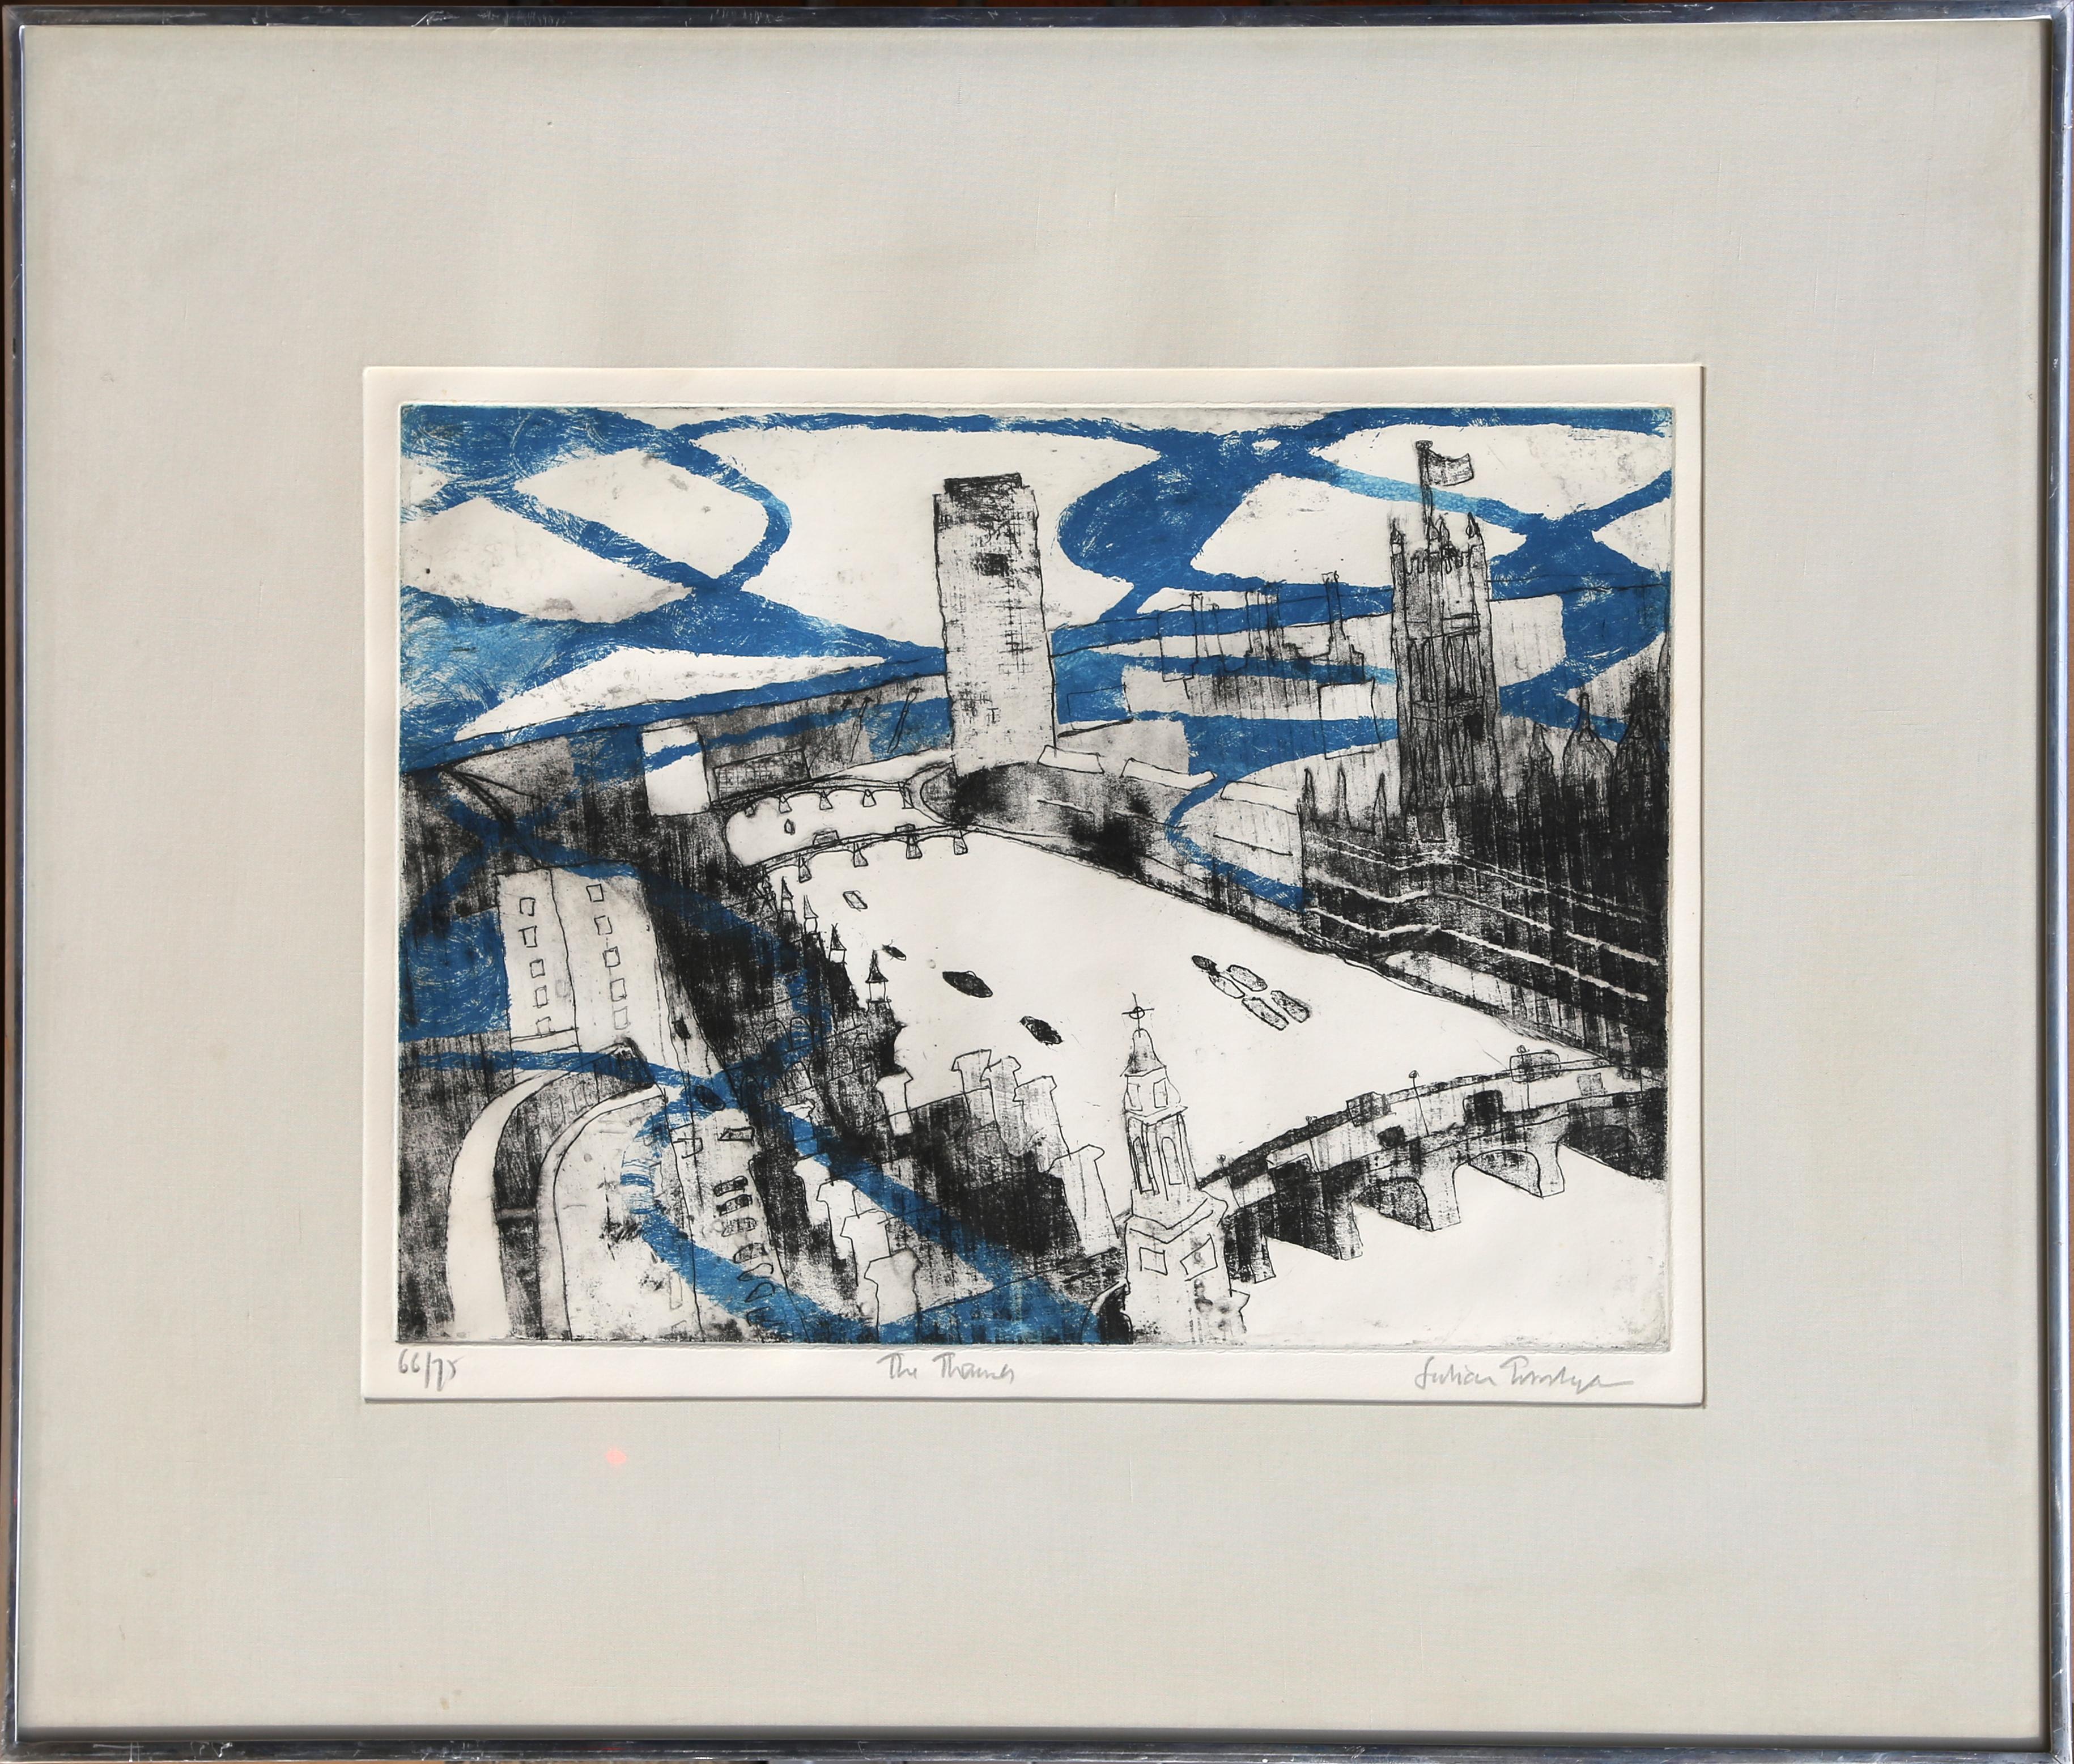 Artist: Julian Trevelyan, British (1910 - 1988)
Title: The Thames
Year: circa 1969
Medium: Etching with Aquatint, signed and numbered in pencil
Edition: 66/75
Image Size: 13.5 x 18.5 inches
Size: 25.5 x 30 inches